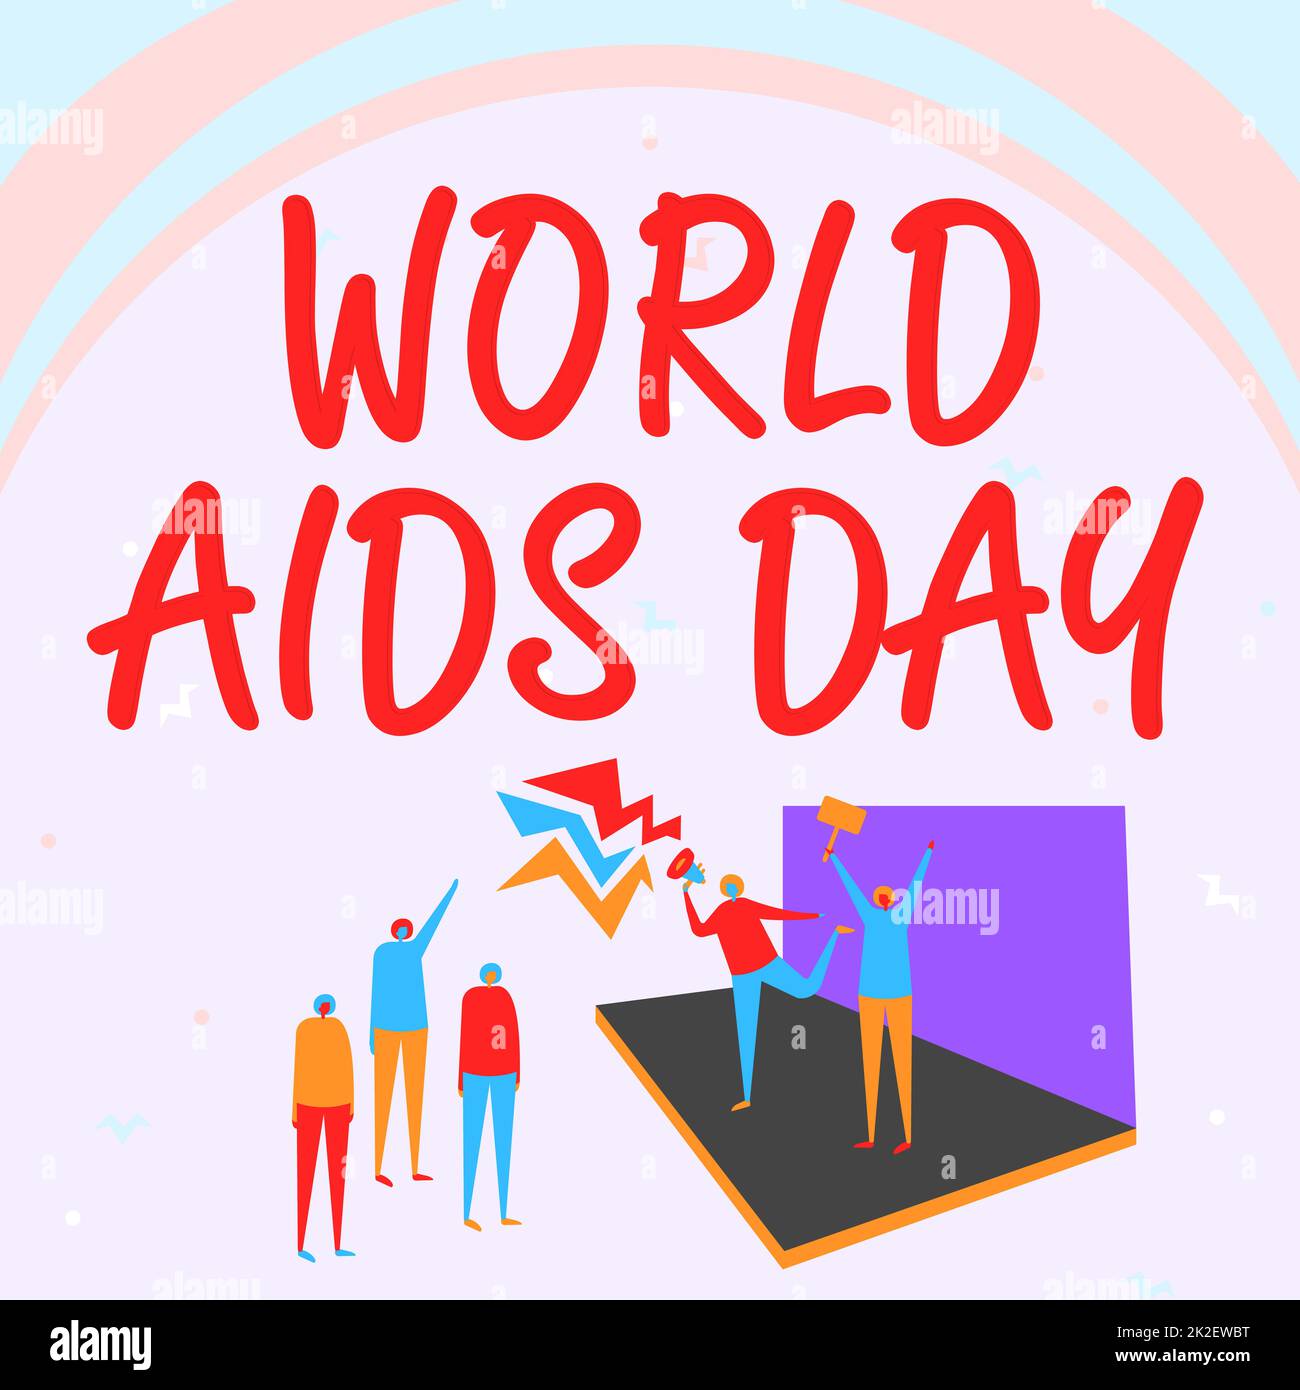 Text sign showing World Aids Day. Concept meaning World Aids Day Illustration Of Couple On Stage Making Announcement To The Small Crowd. Stock Photo